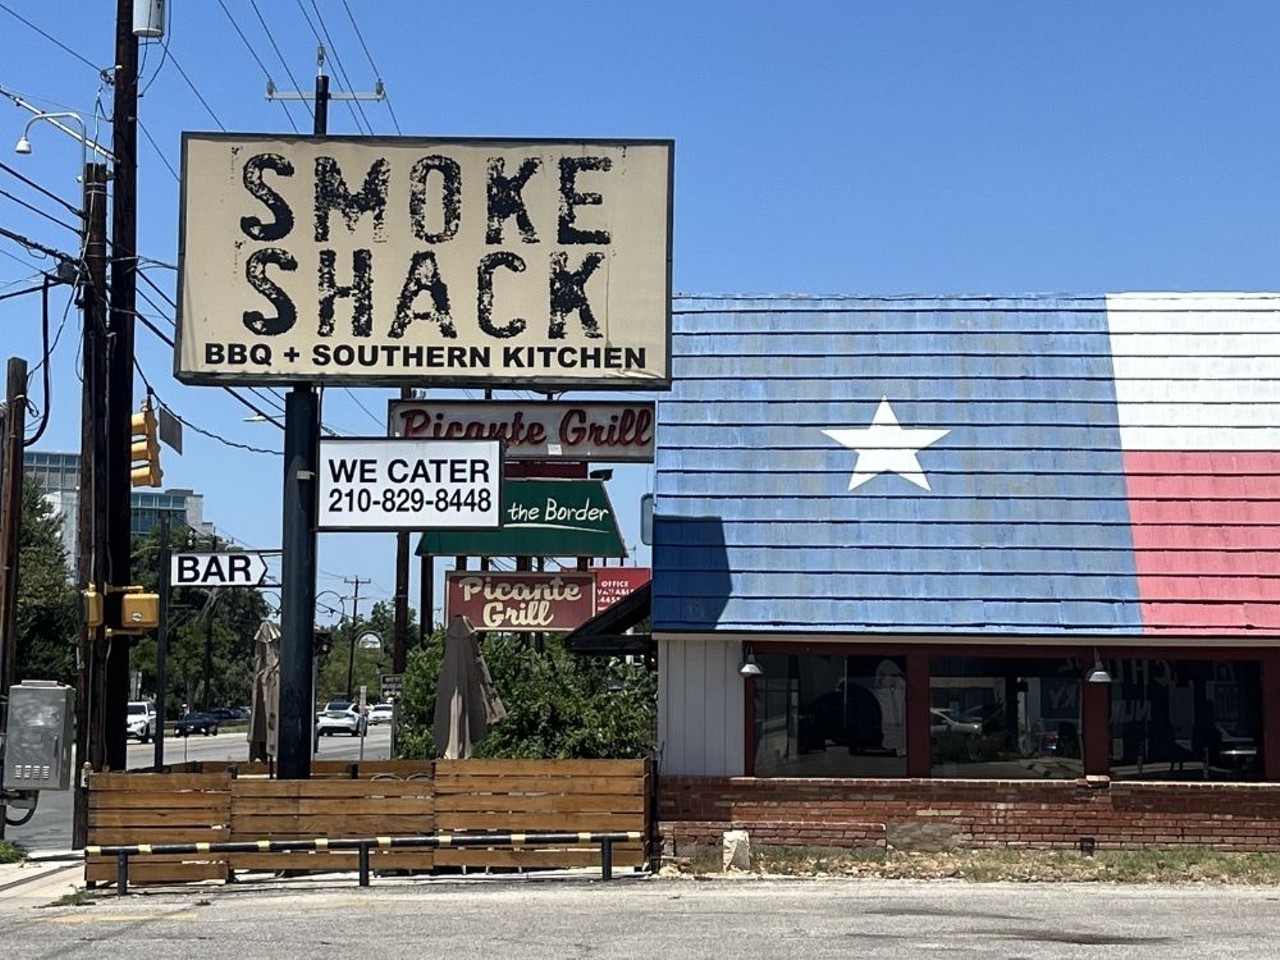 17. The Smoke Shack
3714 Broadway
“Wonderful food, price, atmosphere. Exactly what you want in a barbecue spot. Each meal was more than enough, and a very solid value for the cost. I would recommend Smoke Shack to any.” — Adam T.